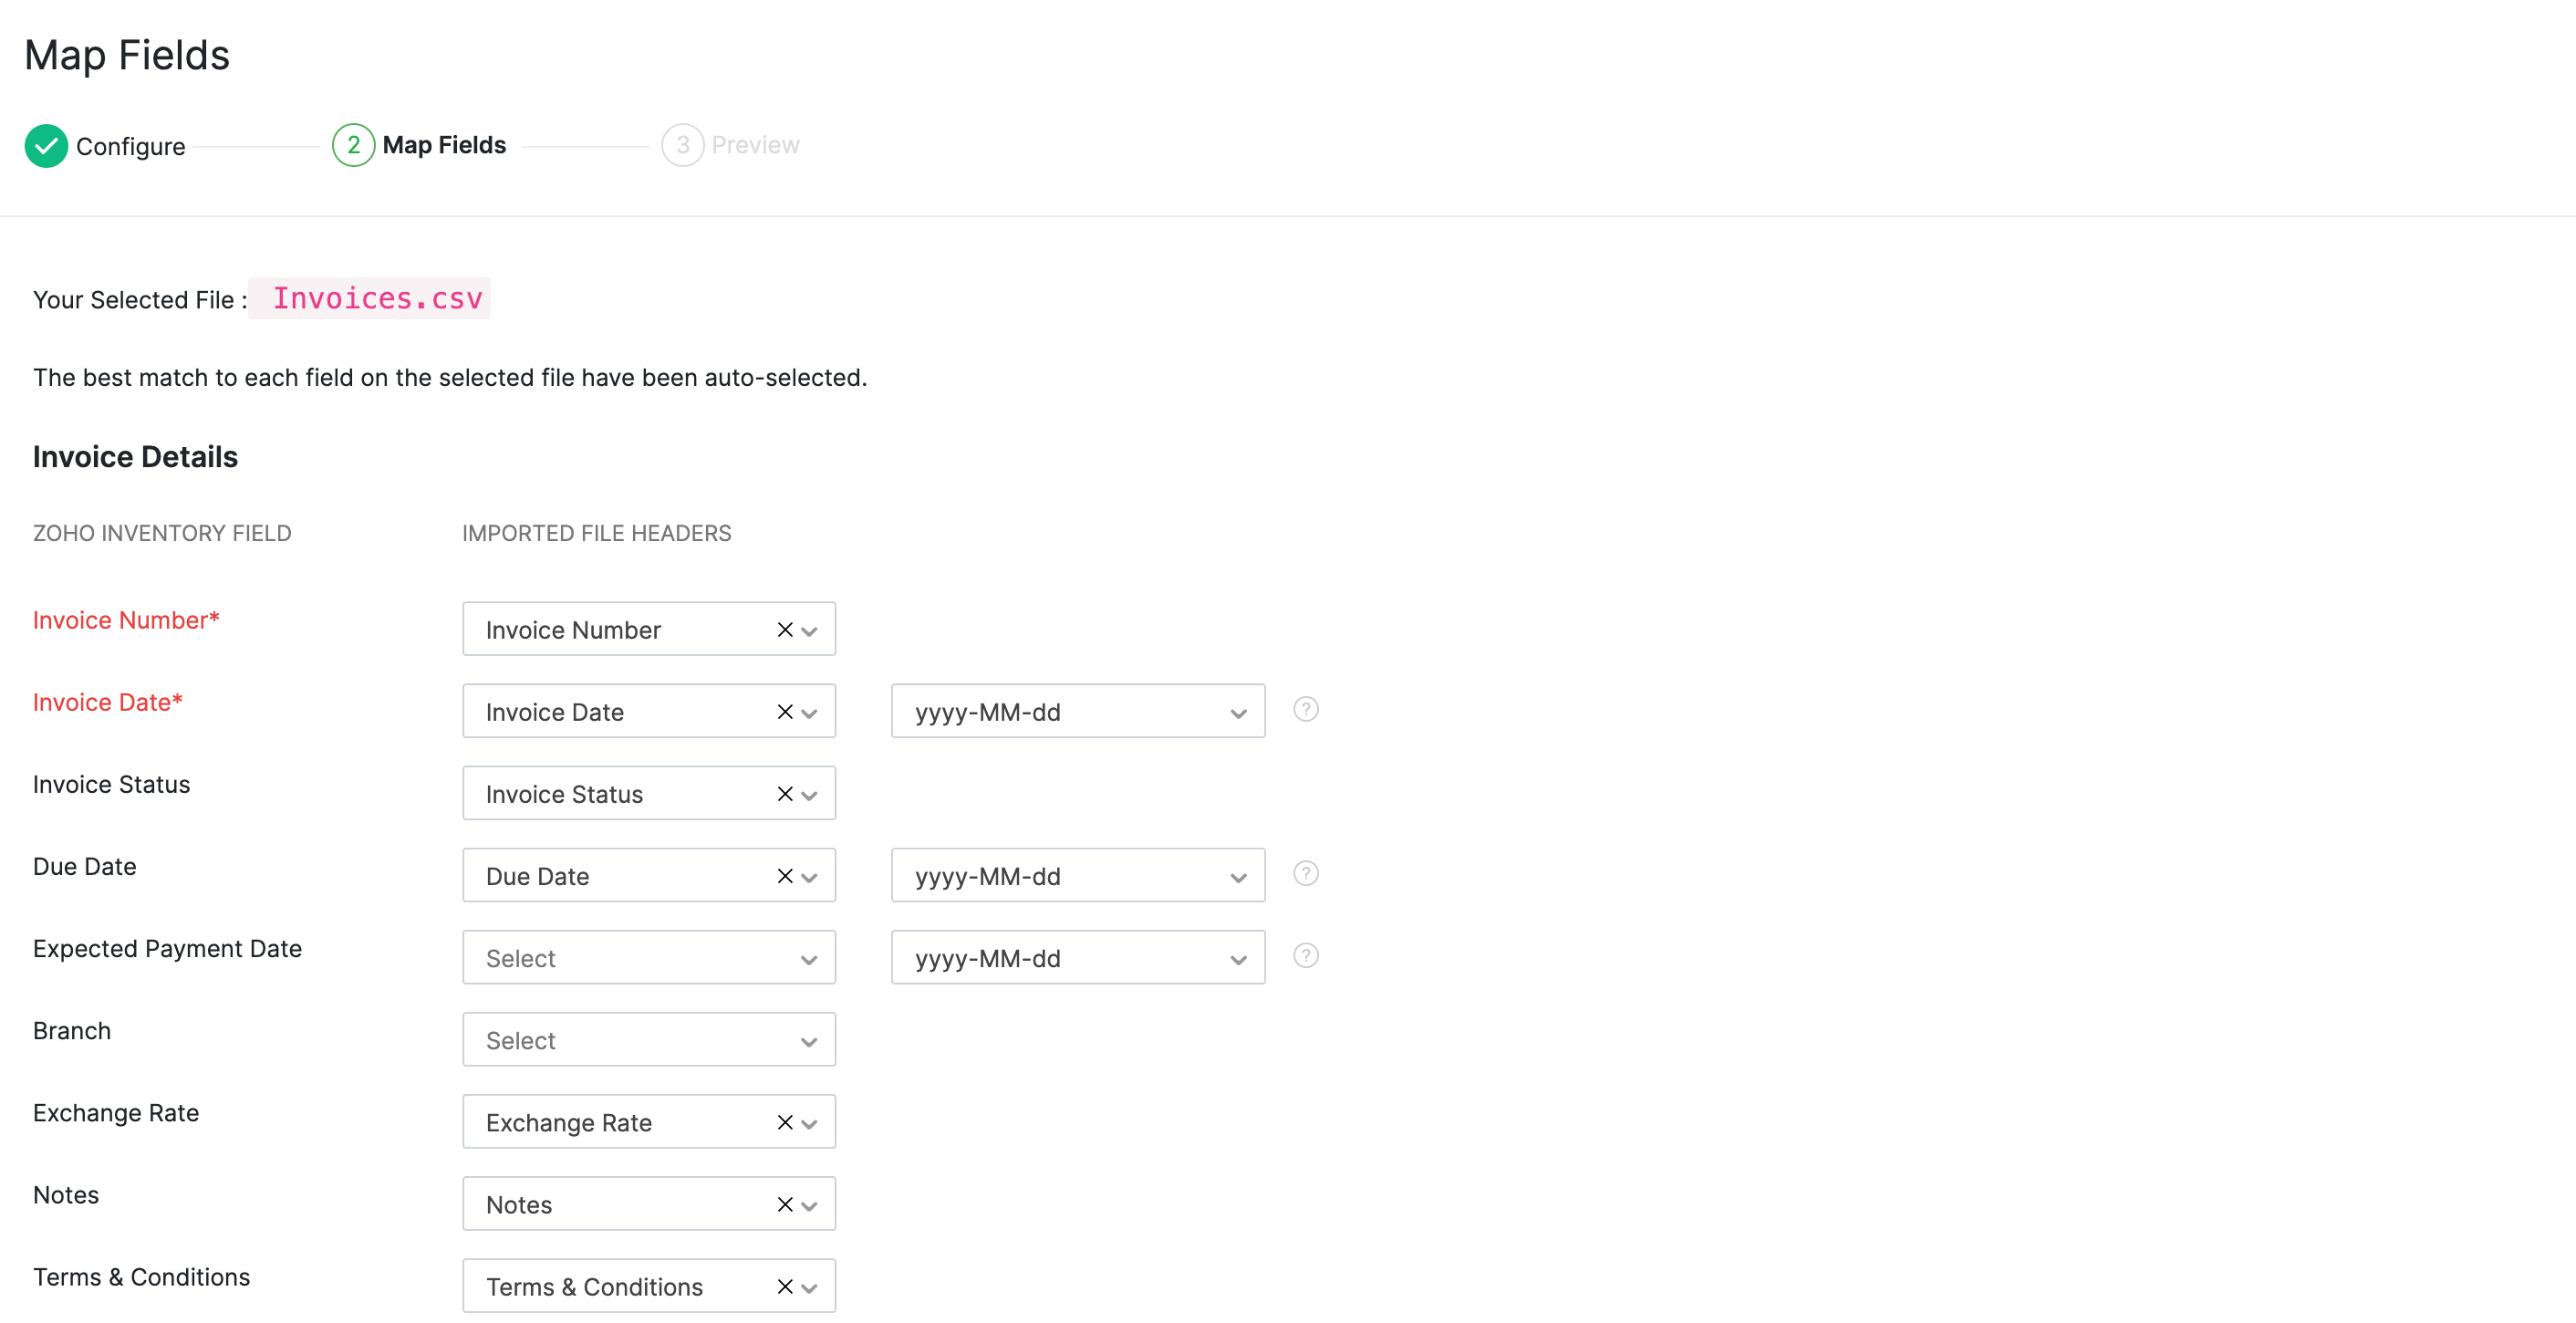 Invoice Import - Mapping fields